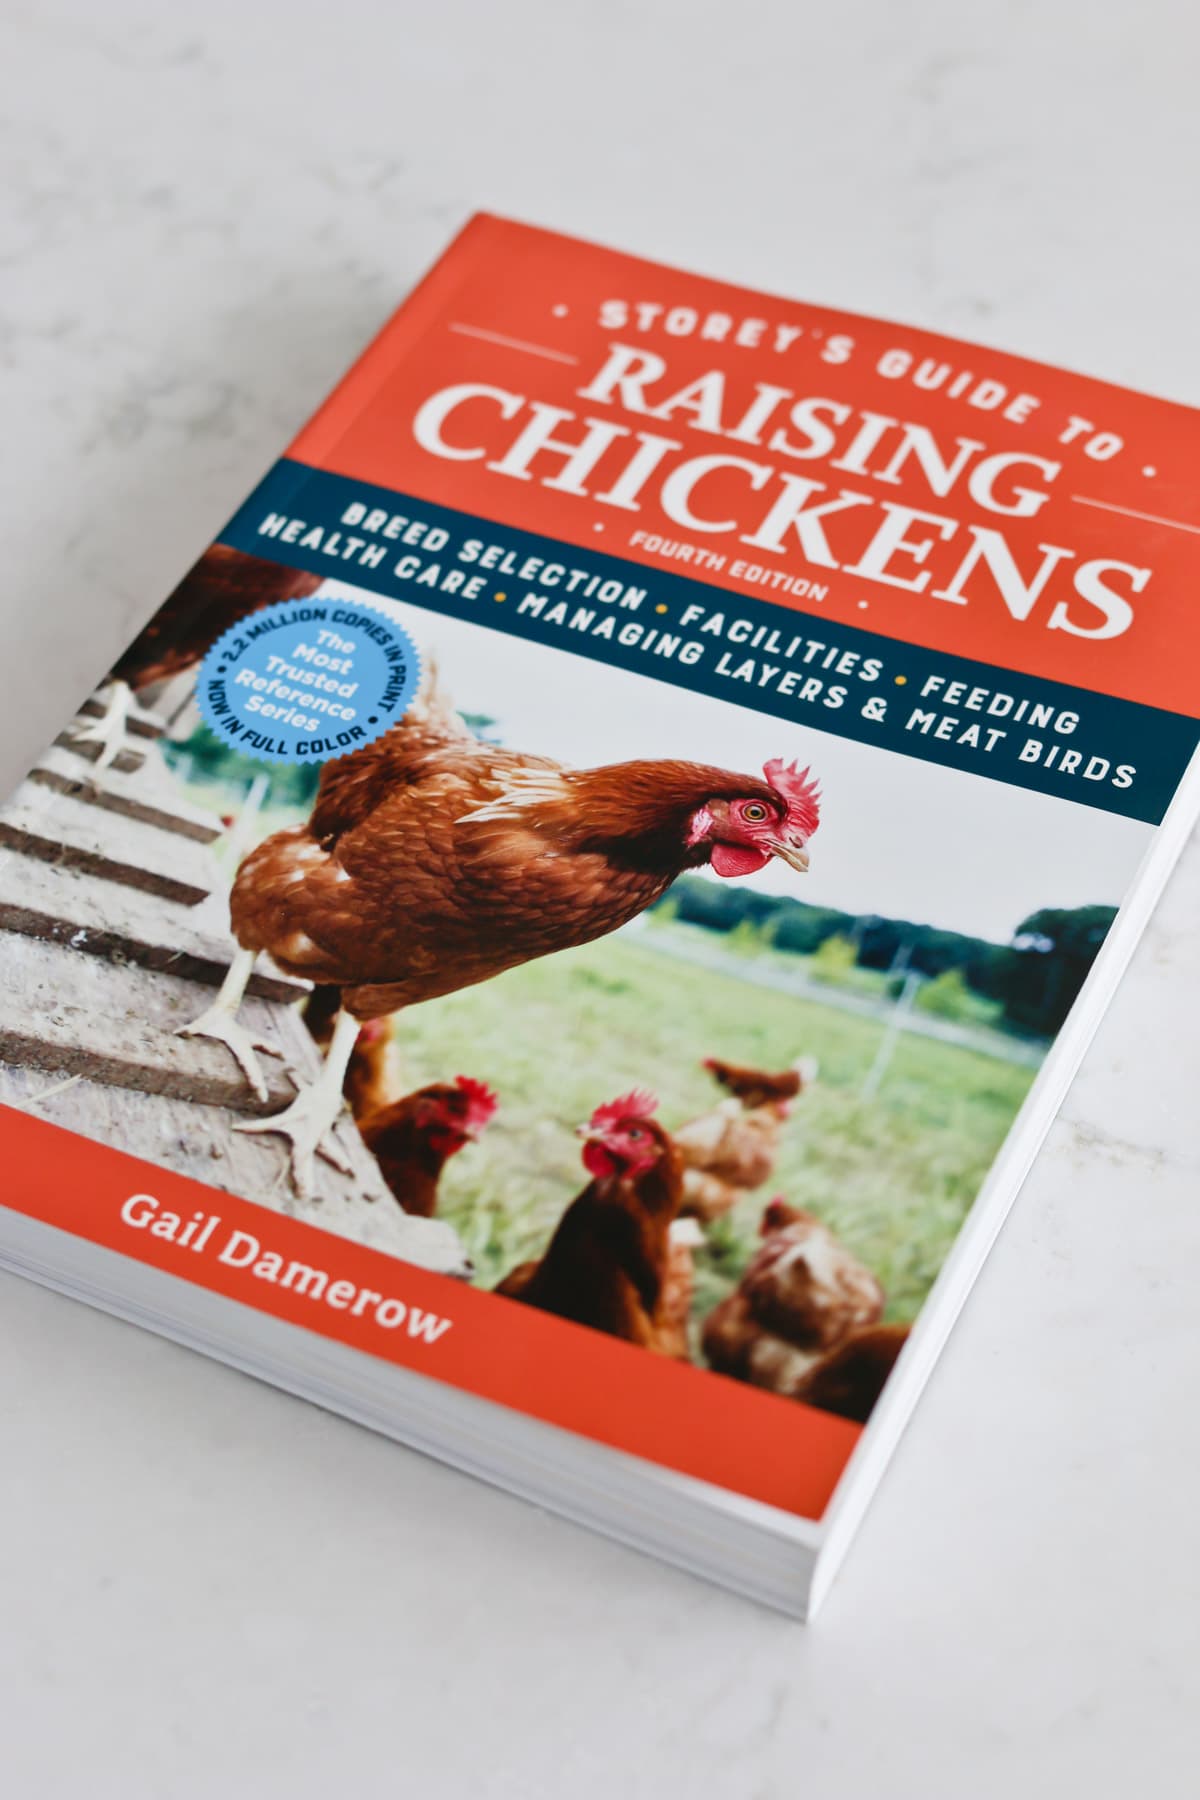 Storey's guide to raising chickens book review